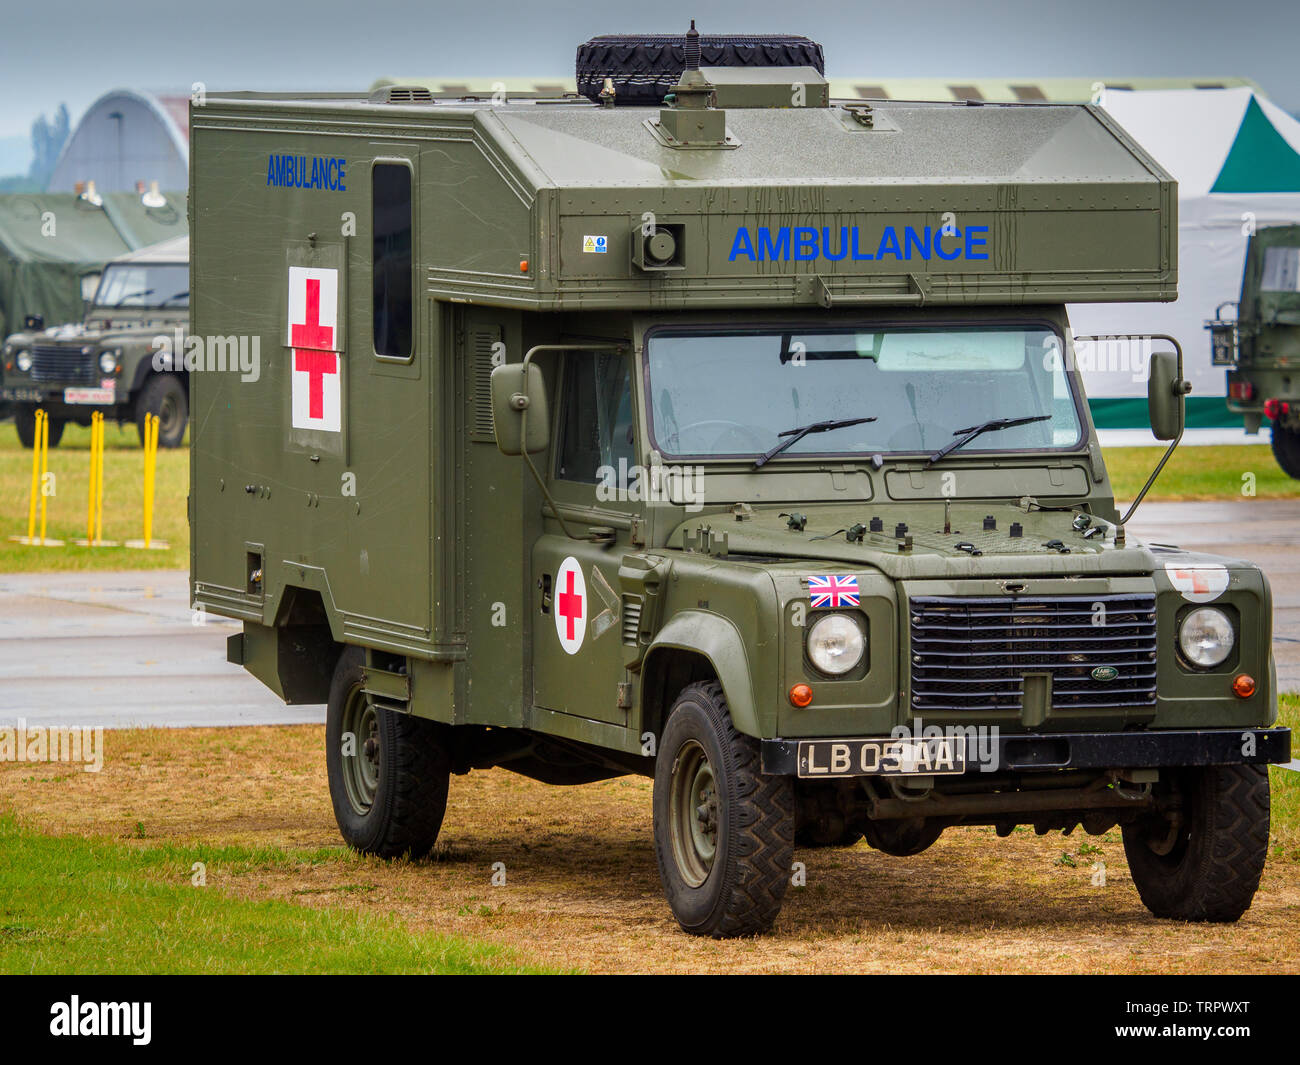 British Army Military Ambulance built on a Land Rover Chassis. Stock Photo